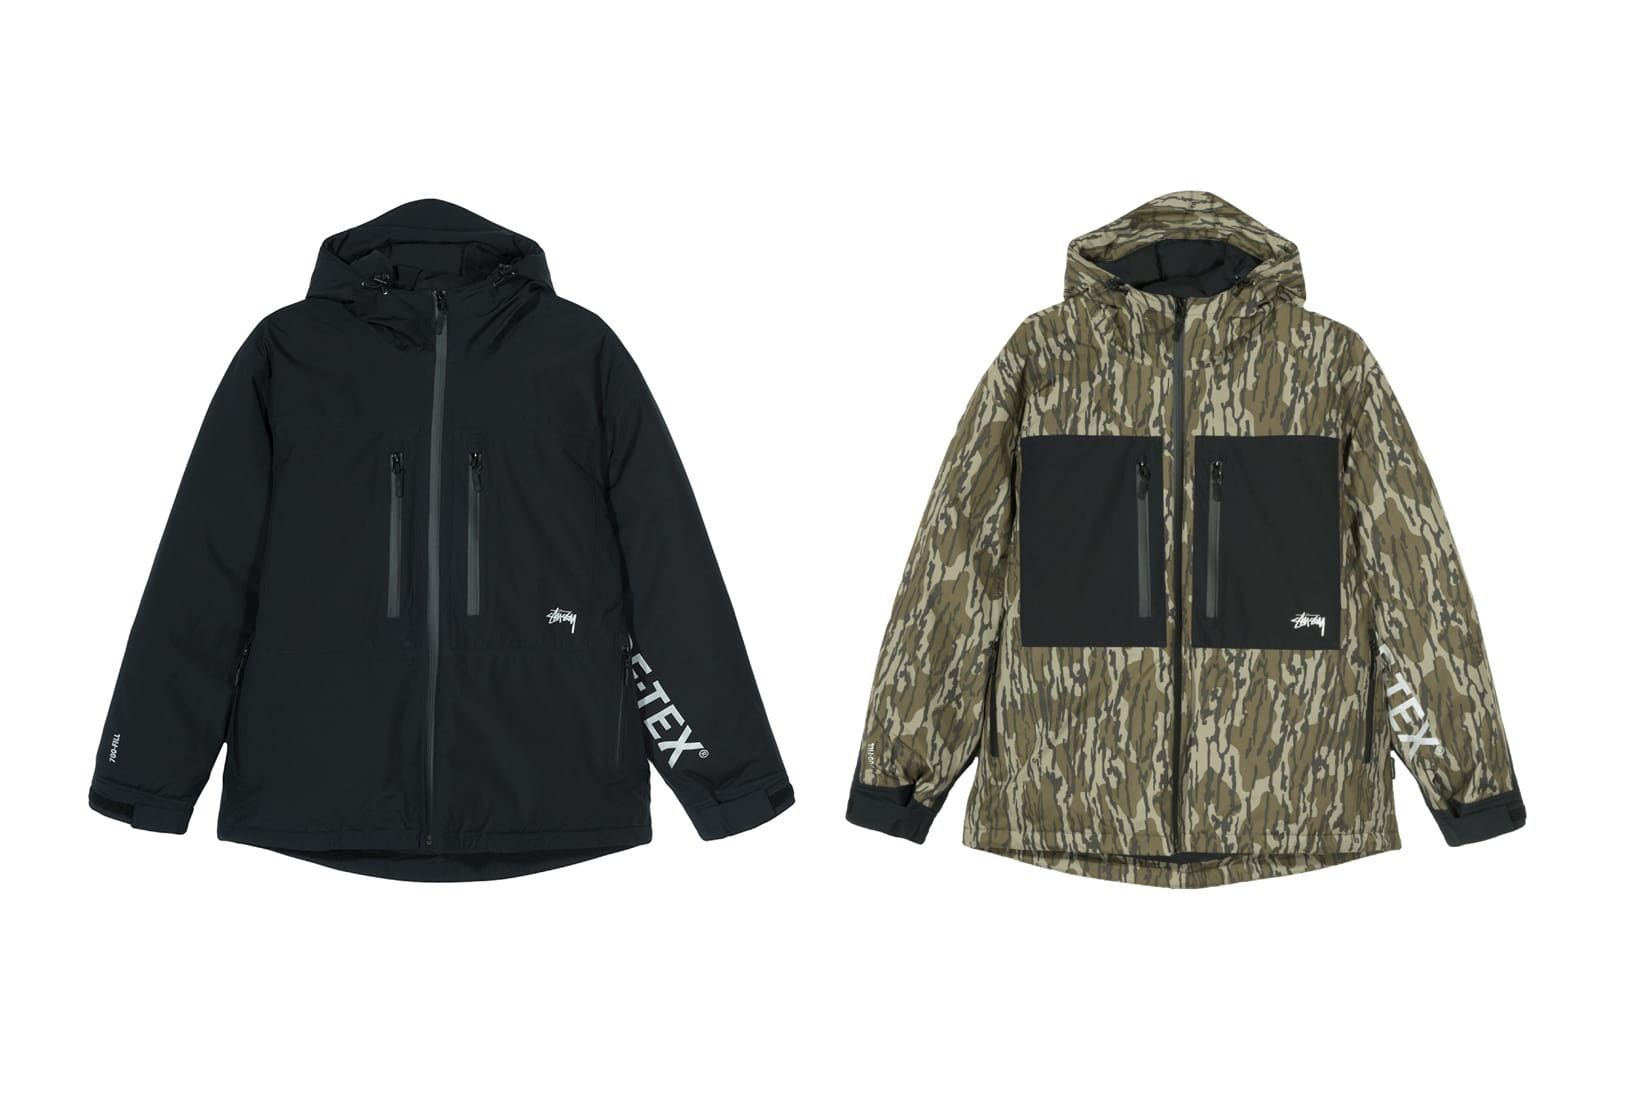 Stussy x GORE-TEX Release Capsule Collection | Hypebae